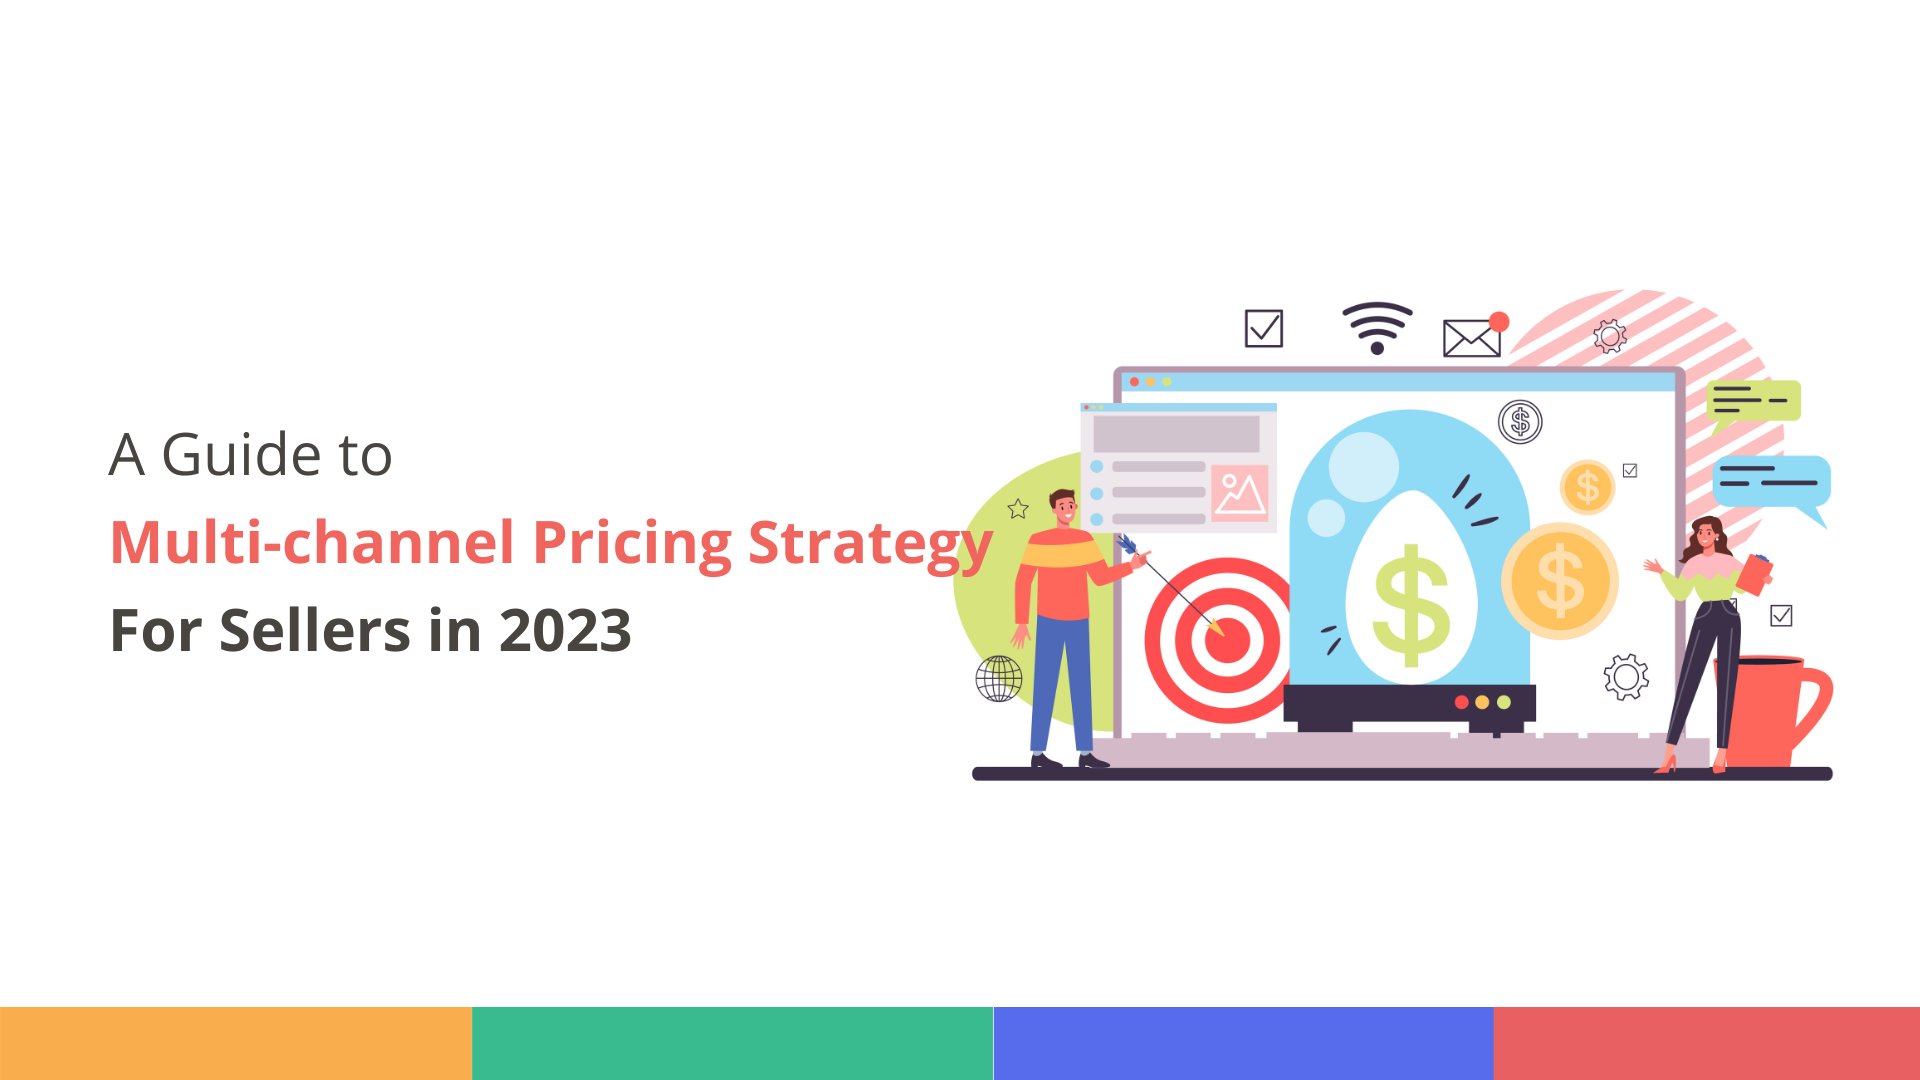 Multi-channel Pricing Strategy